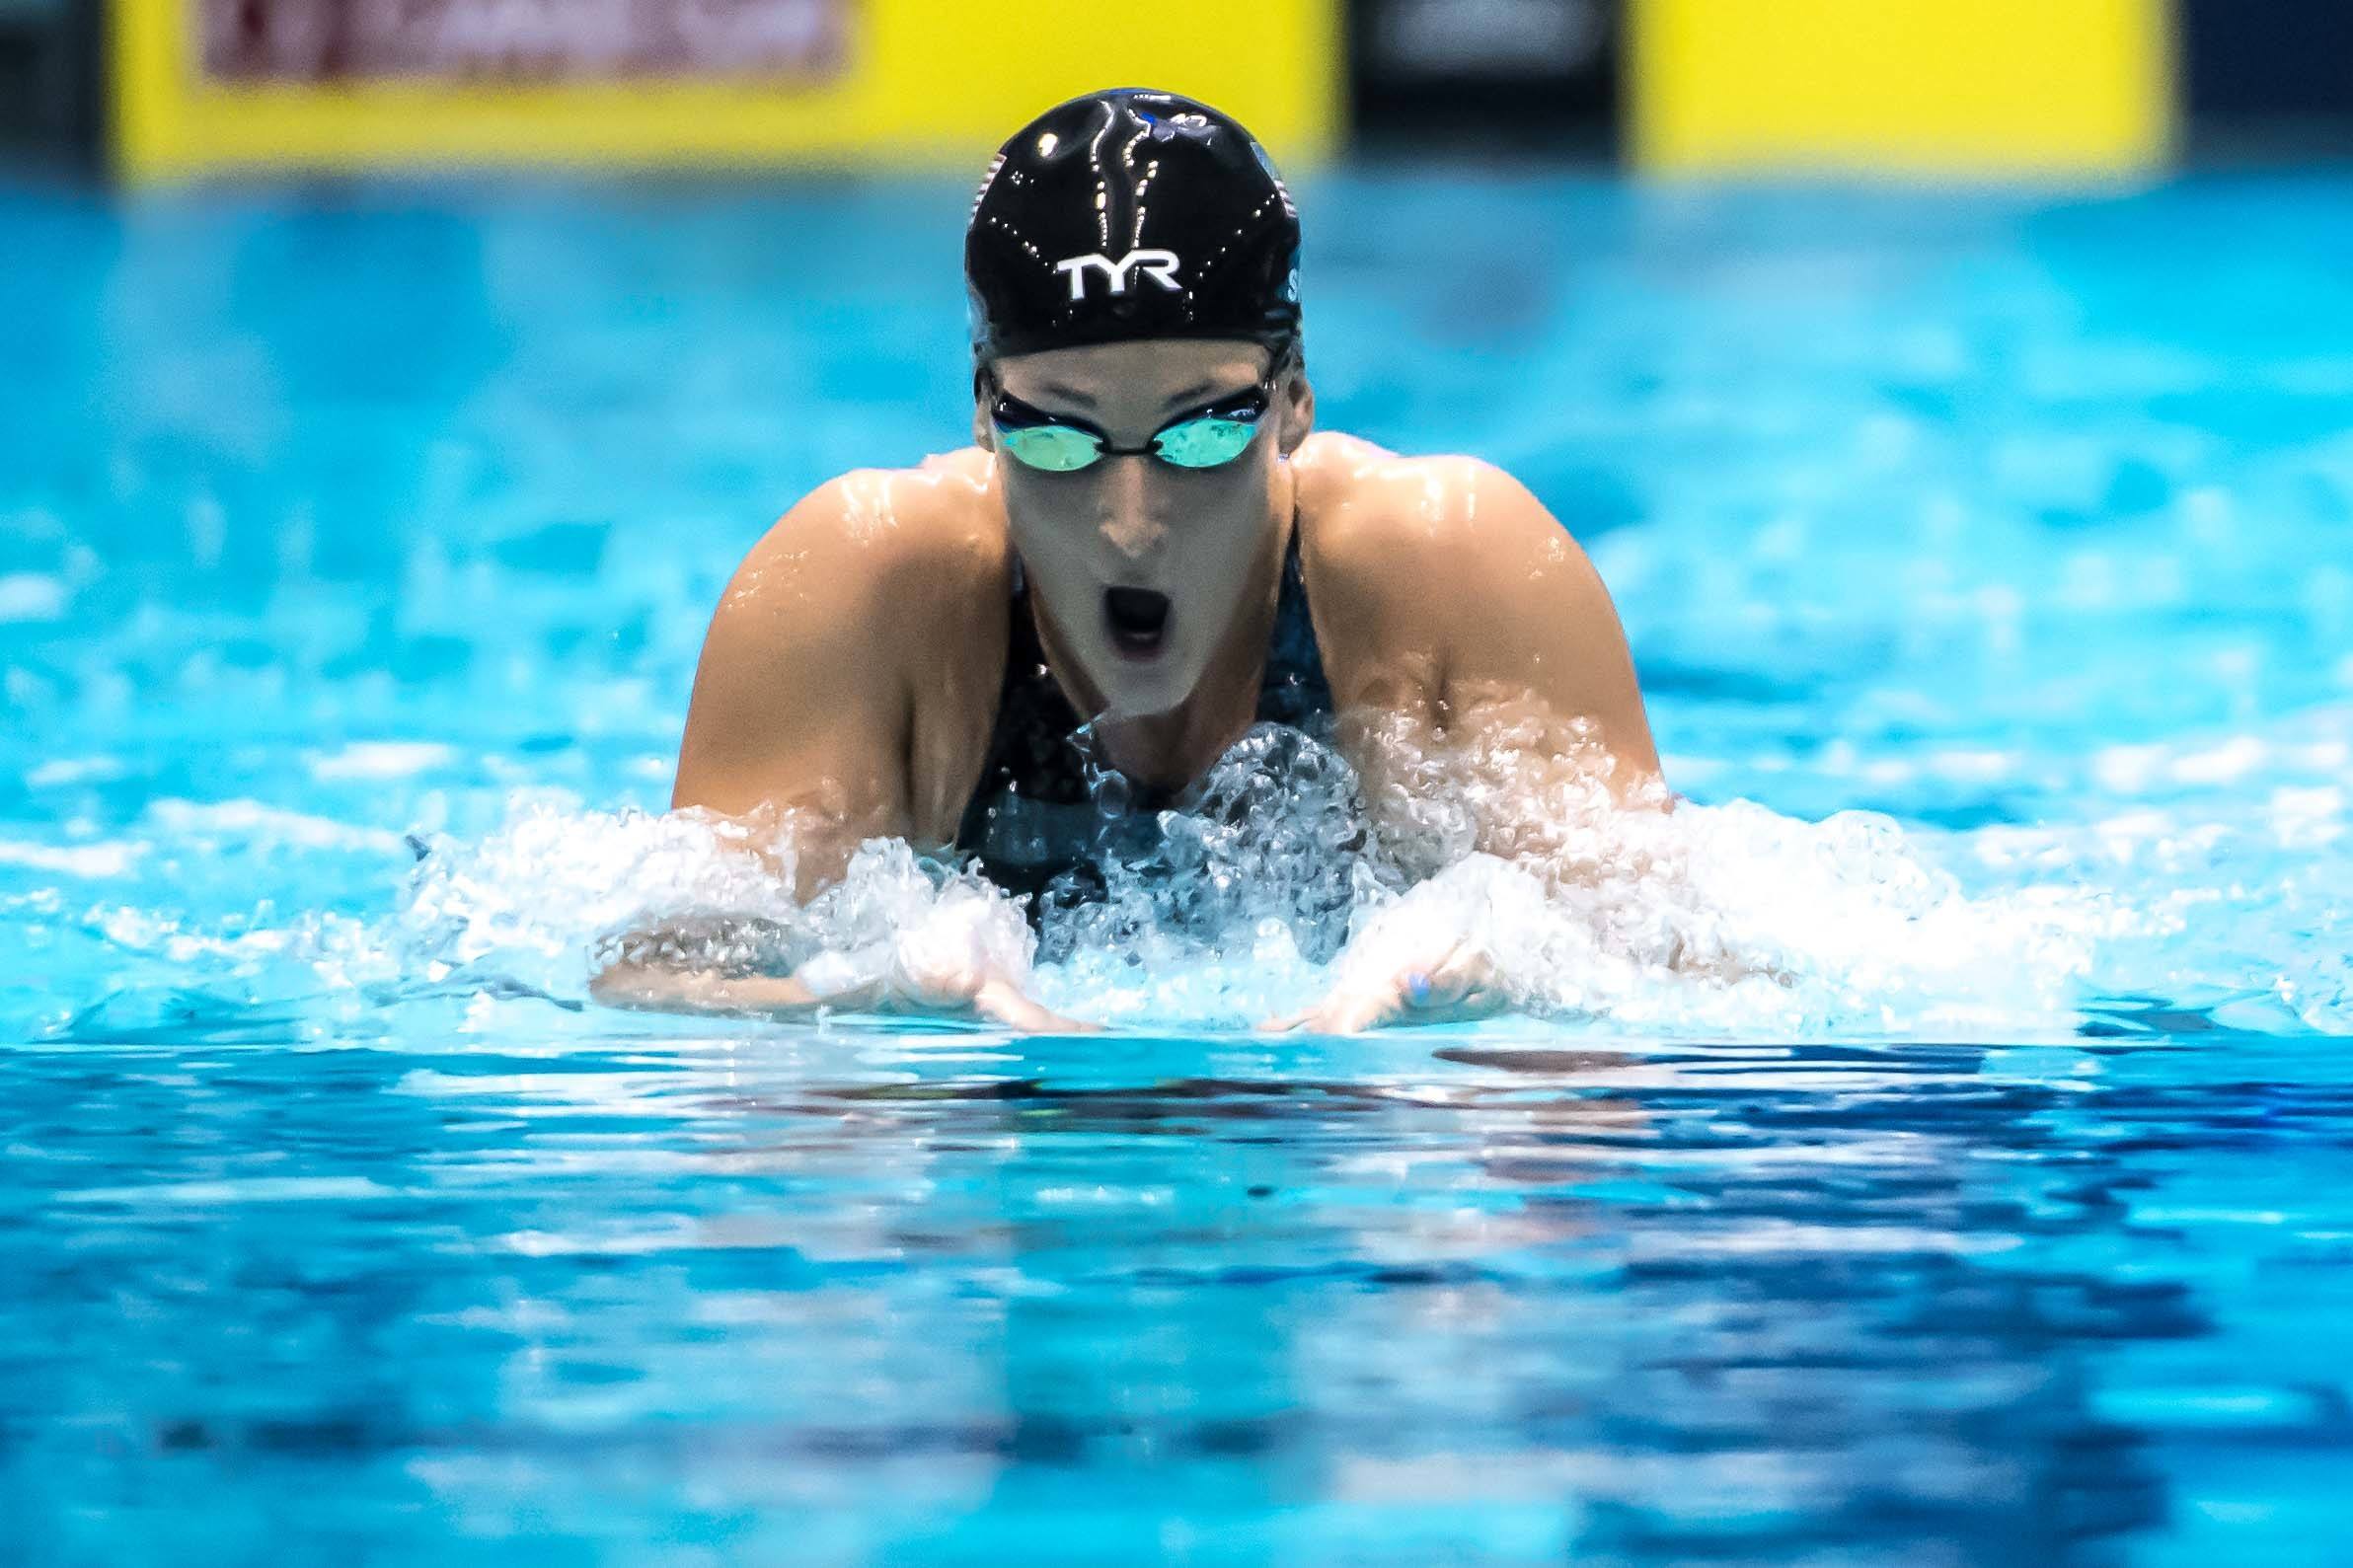 TYR Sport Signs Two-Time Olympic Medalist Leah Smith